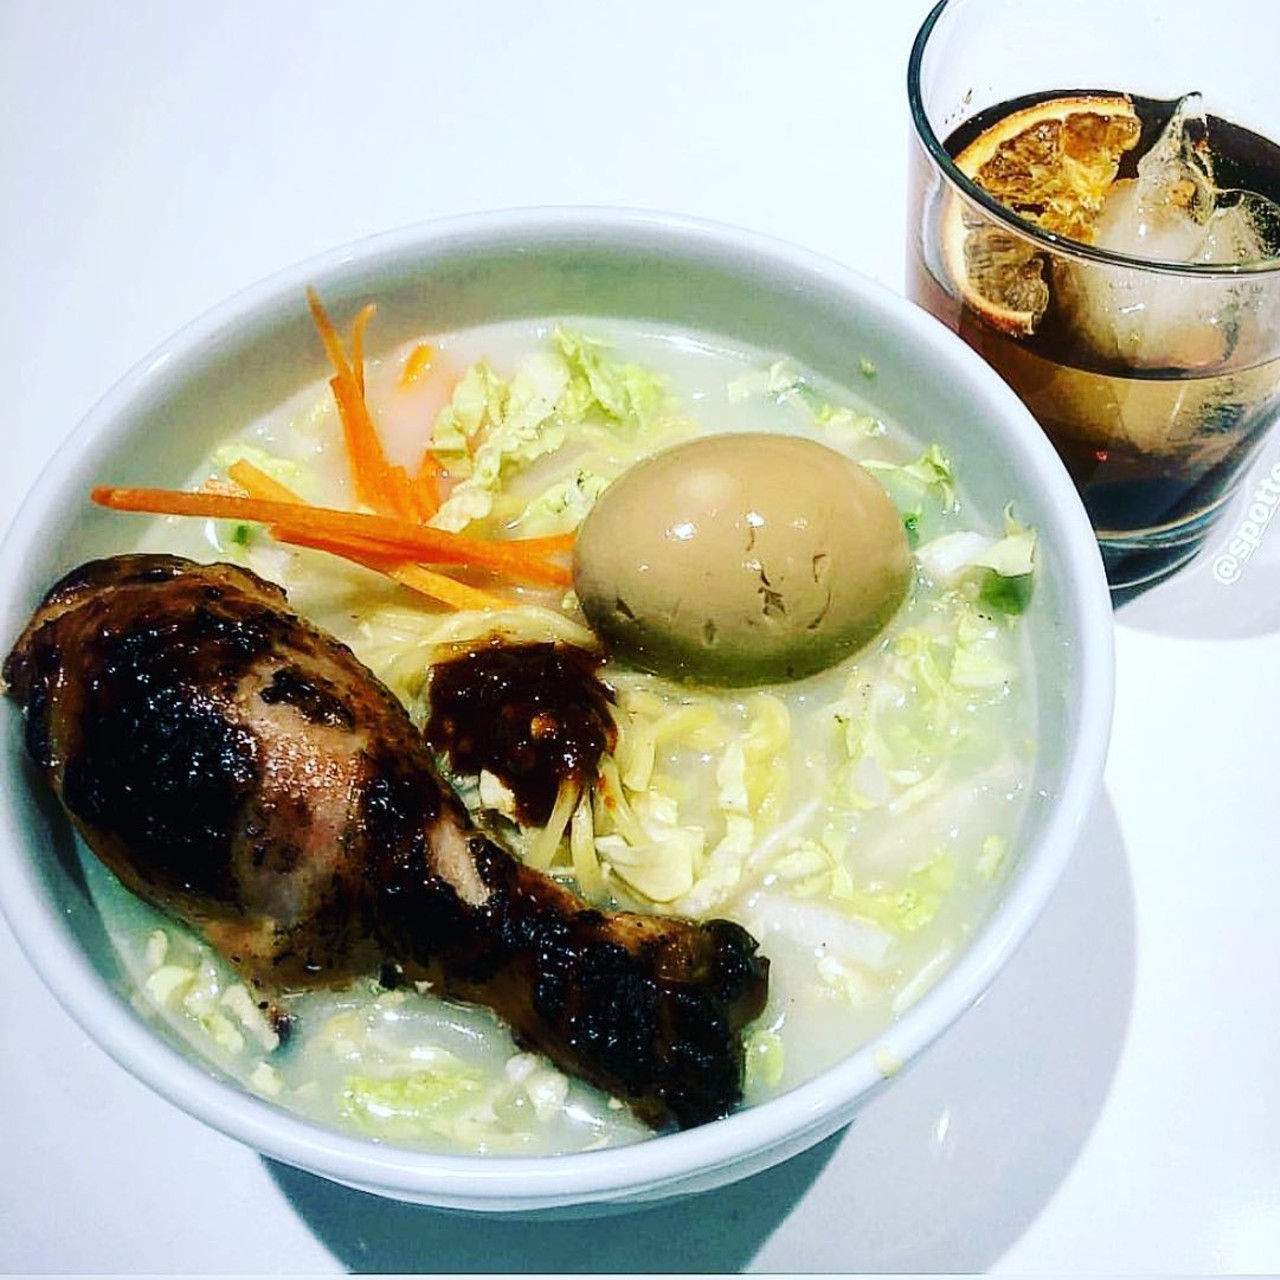  Ushabu
2173 Professor Ave., Cleveland
Take-home ramen? Sign us up. Ushabu is offering a ramen feast for $50, at-home dinner boxes for $20 per person and chicken tonkotsu ramen bowls for $15.
Photo via Ushabu/Facebook